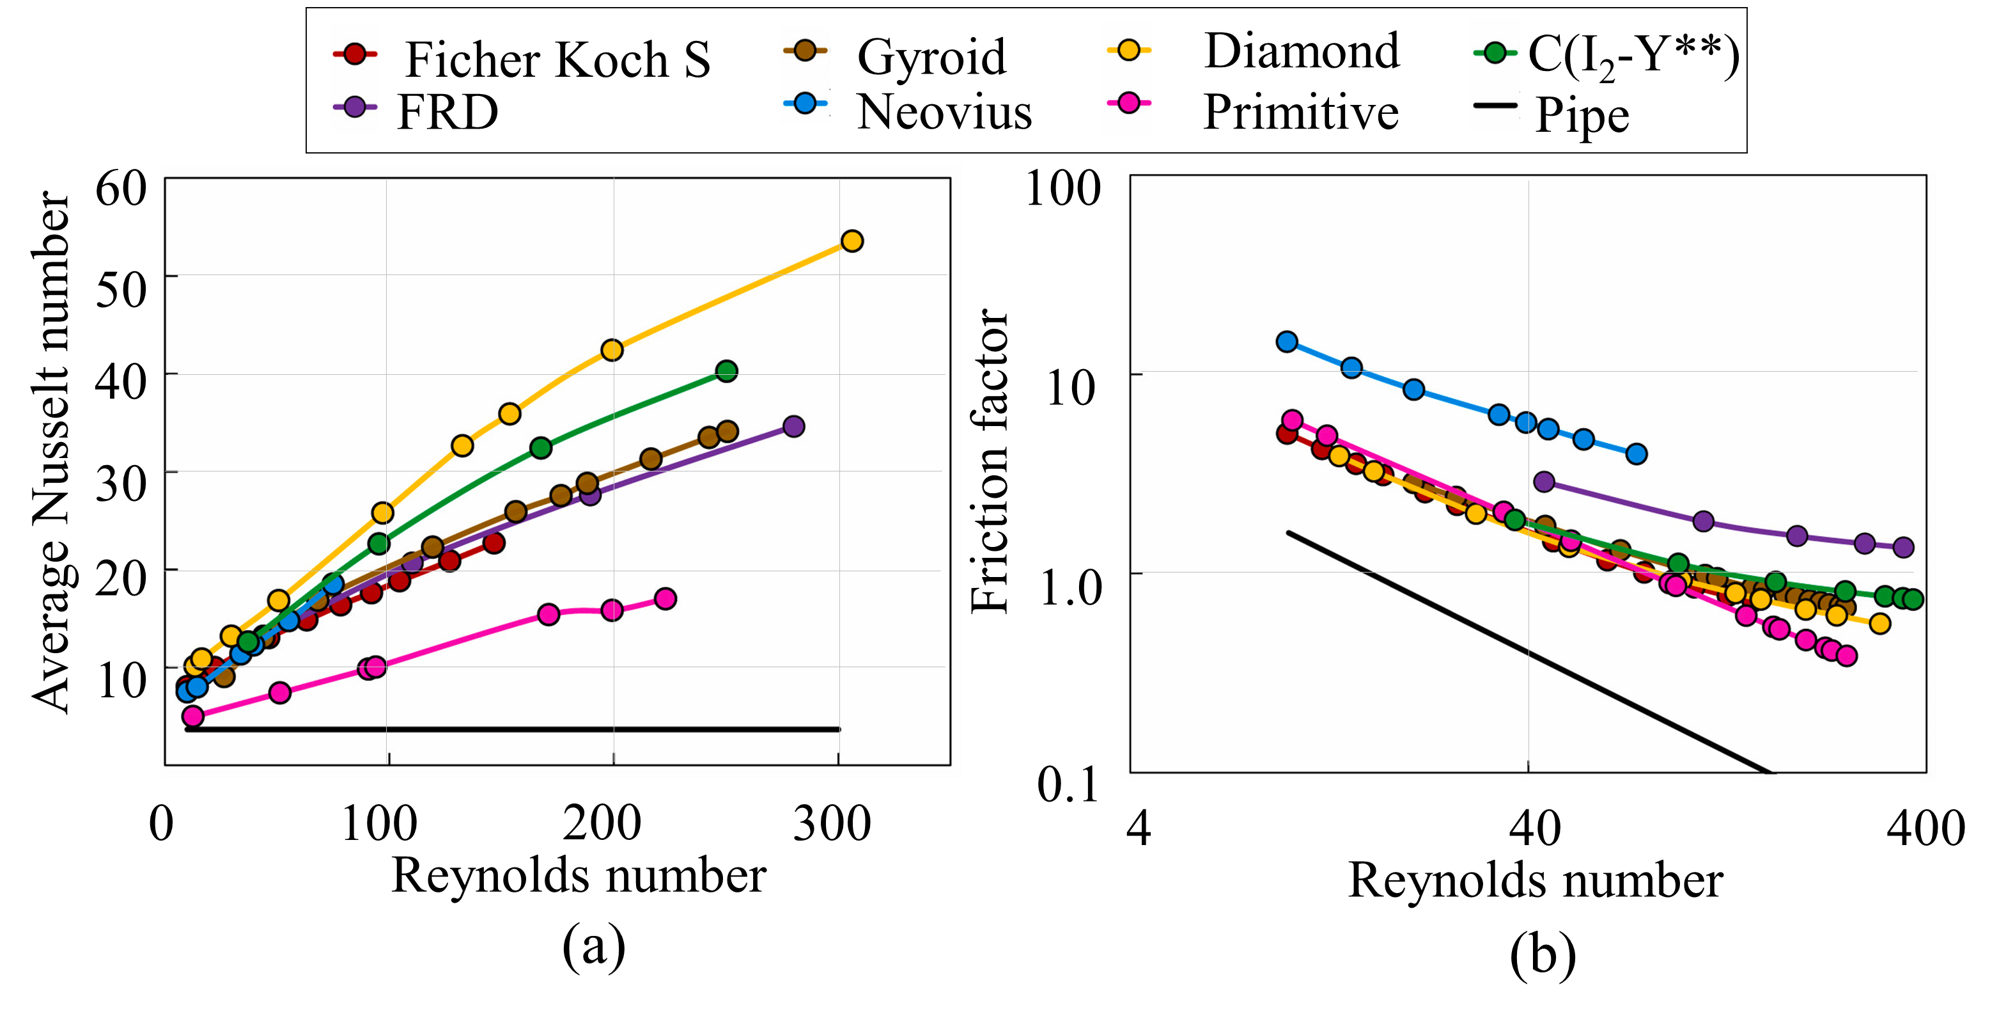 Comparisons of the Nusselt number and friction factor of different TPMS topologies for the same infinitesimally thin walls (The correlations are provided by Iyer et al. [52]): (a) Averaged Nusselt numbers; (b) Friction factors.